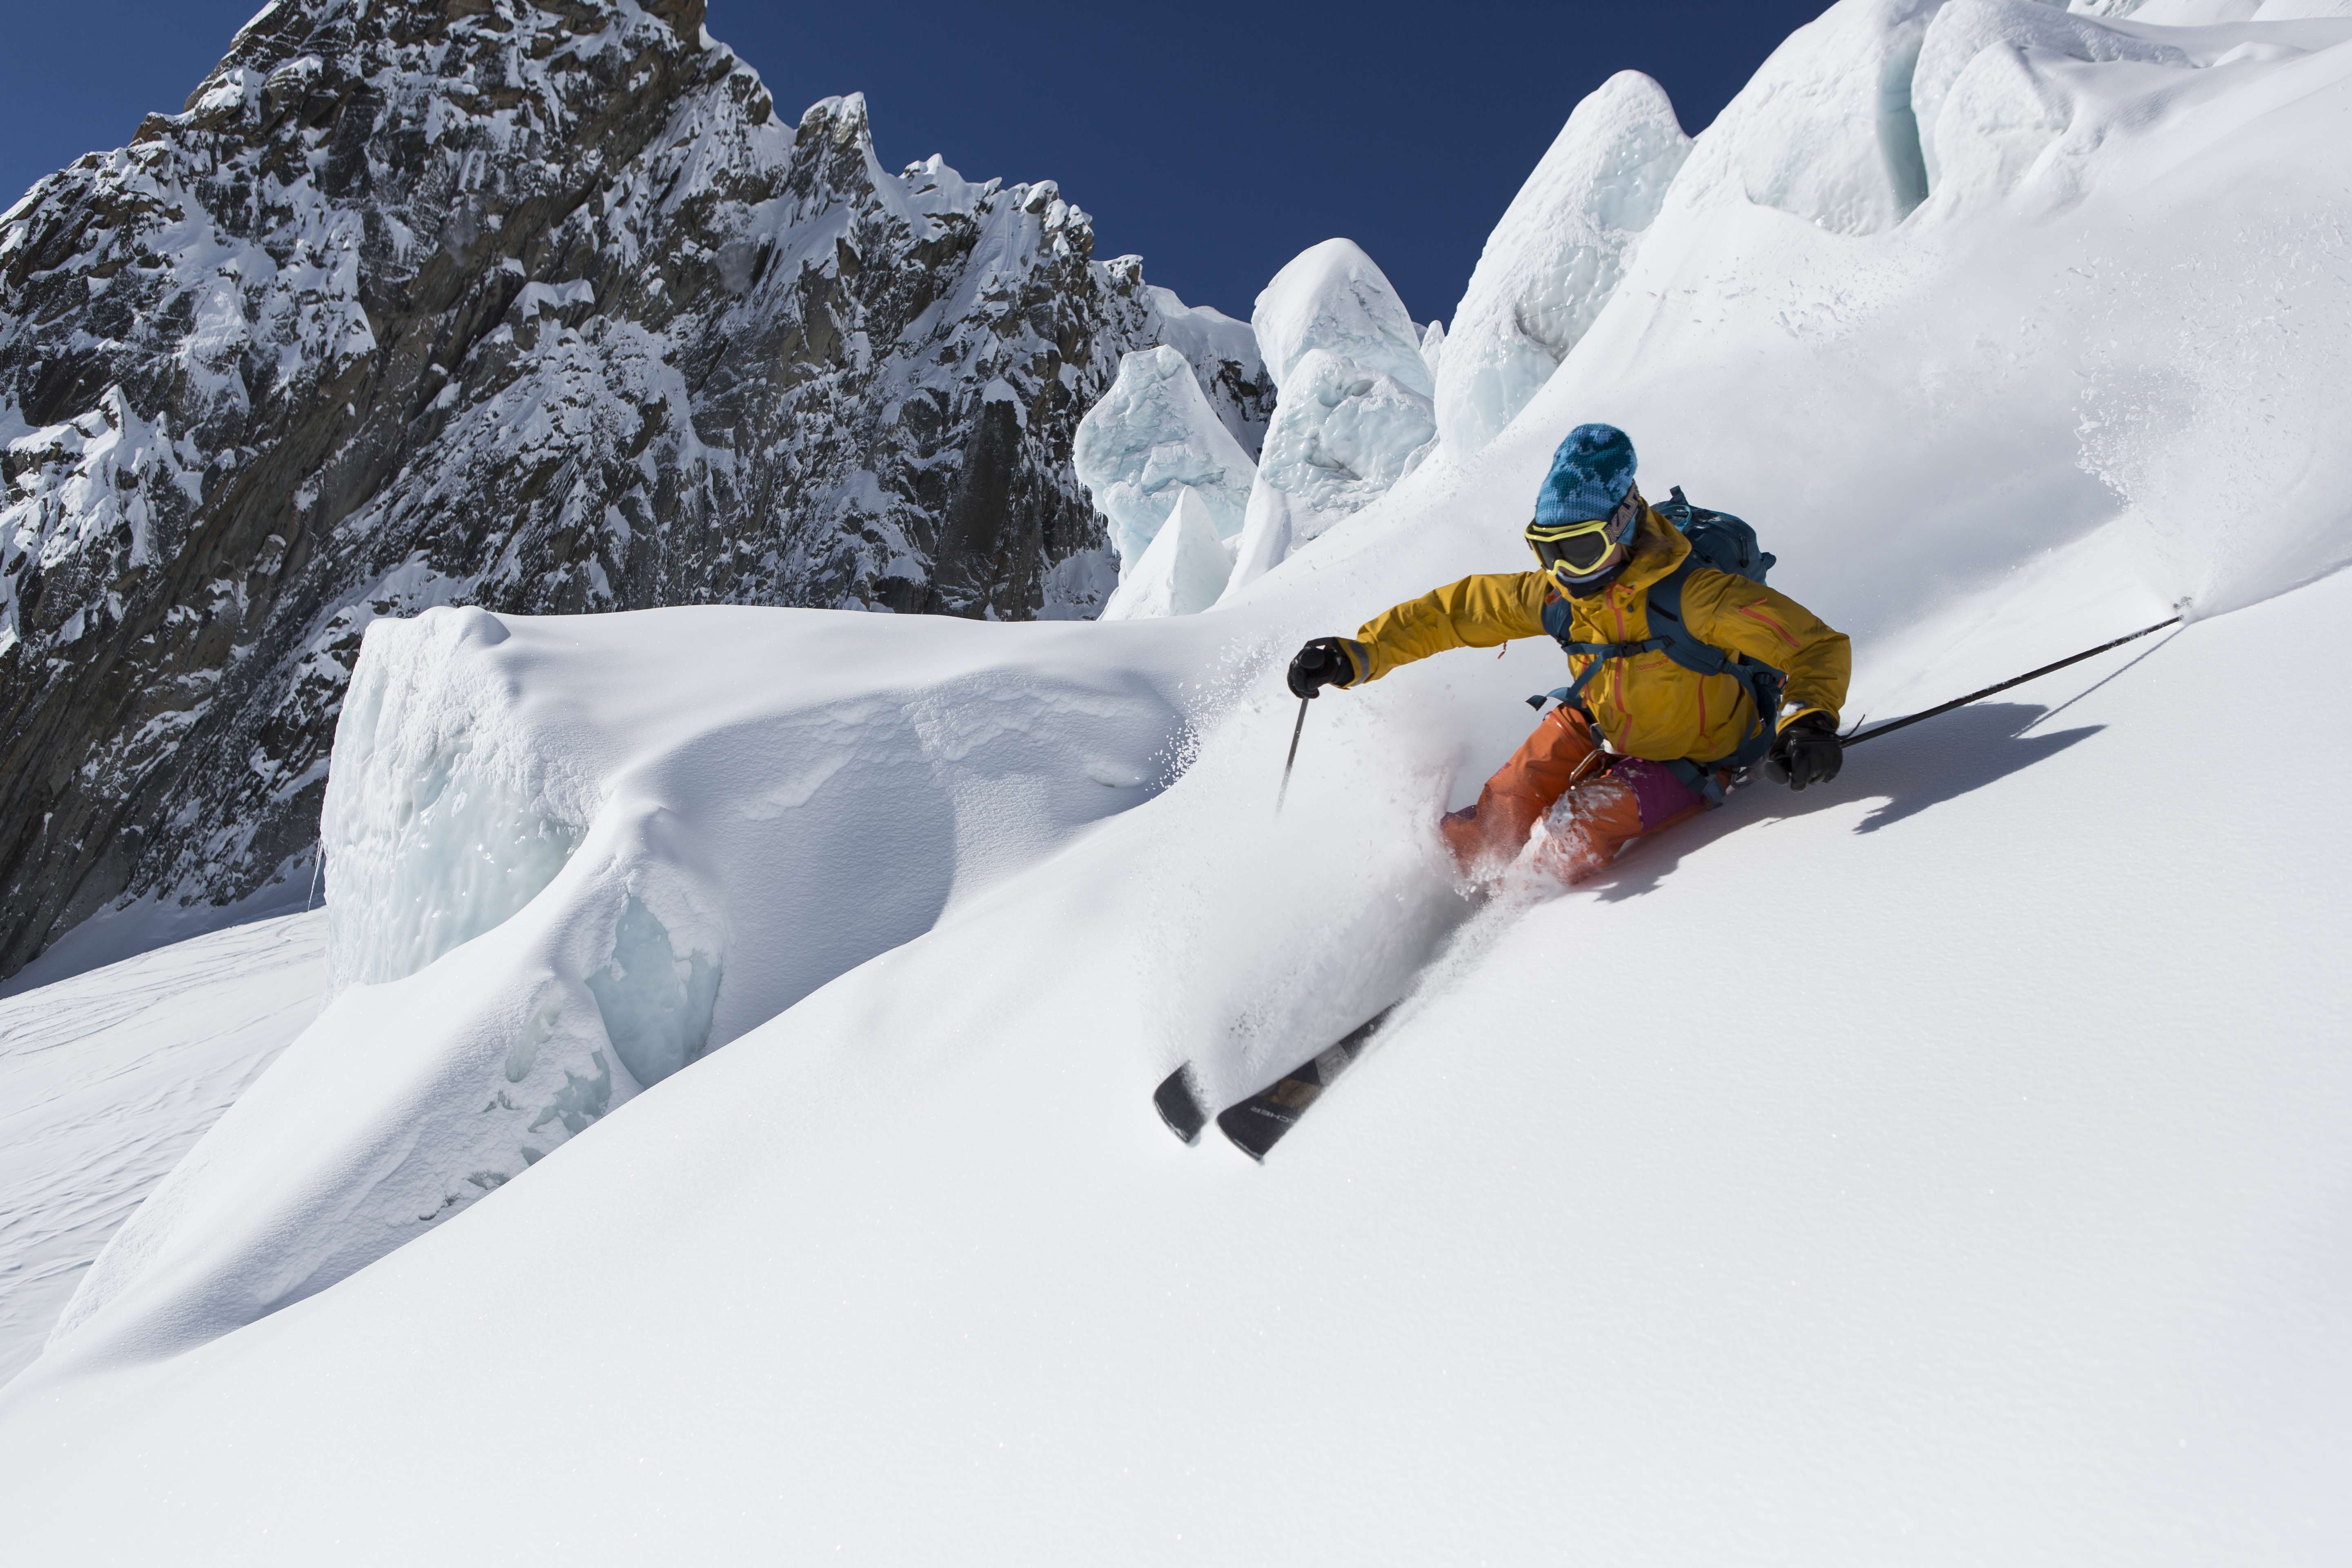 Huge improvements in ski equipment enable recreational skiers to make serious forays into wild terrain, once the exclusive territory of ‘experts’. Here’s where to buy the best gear